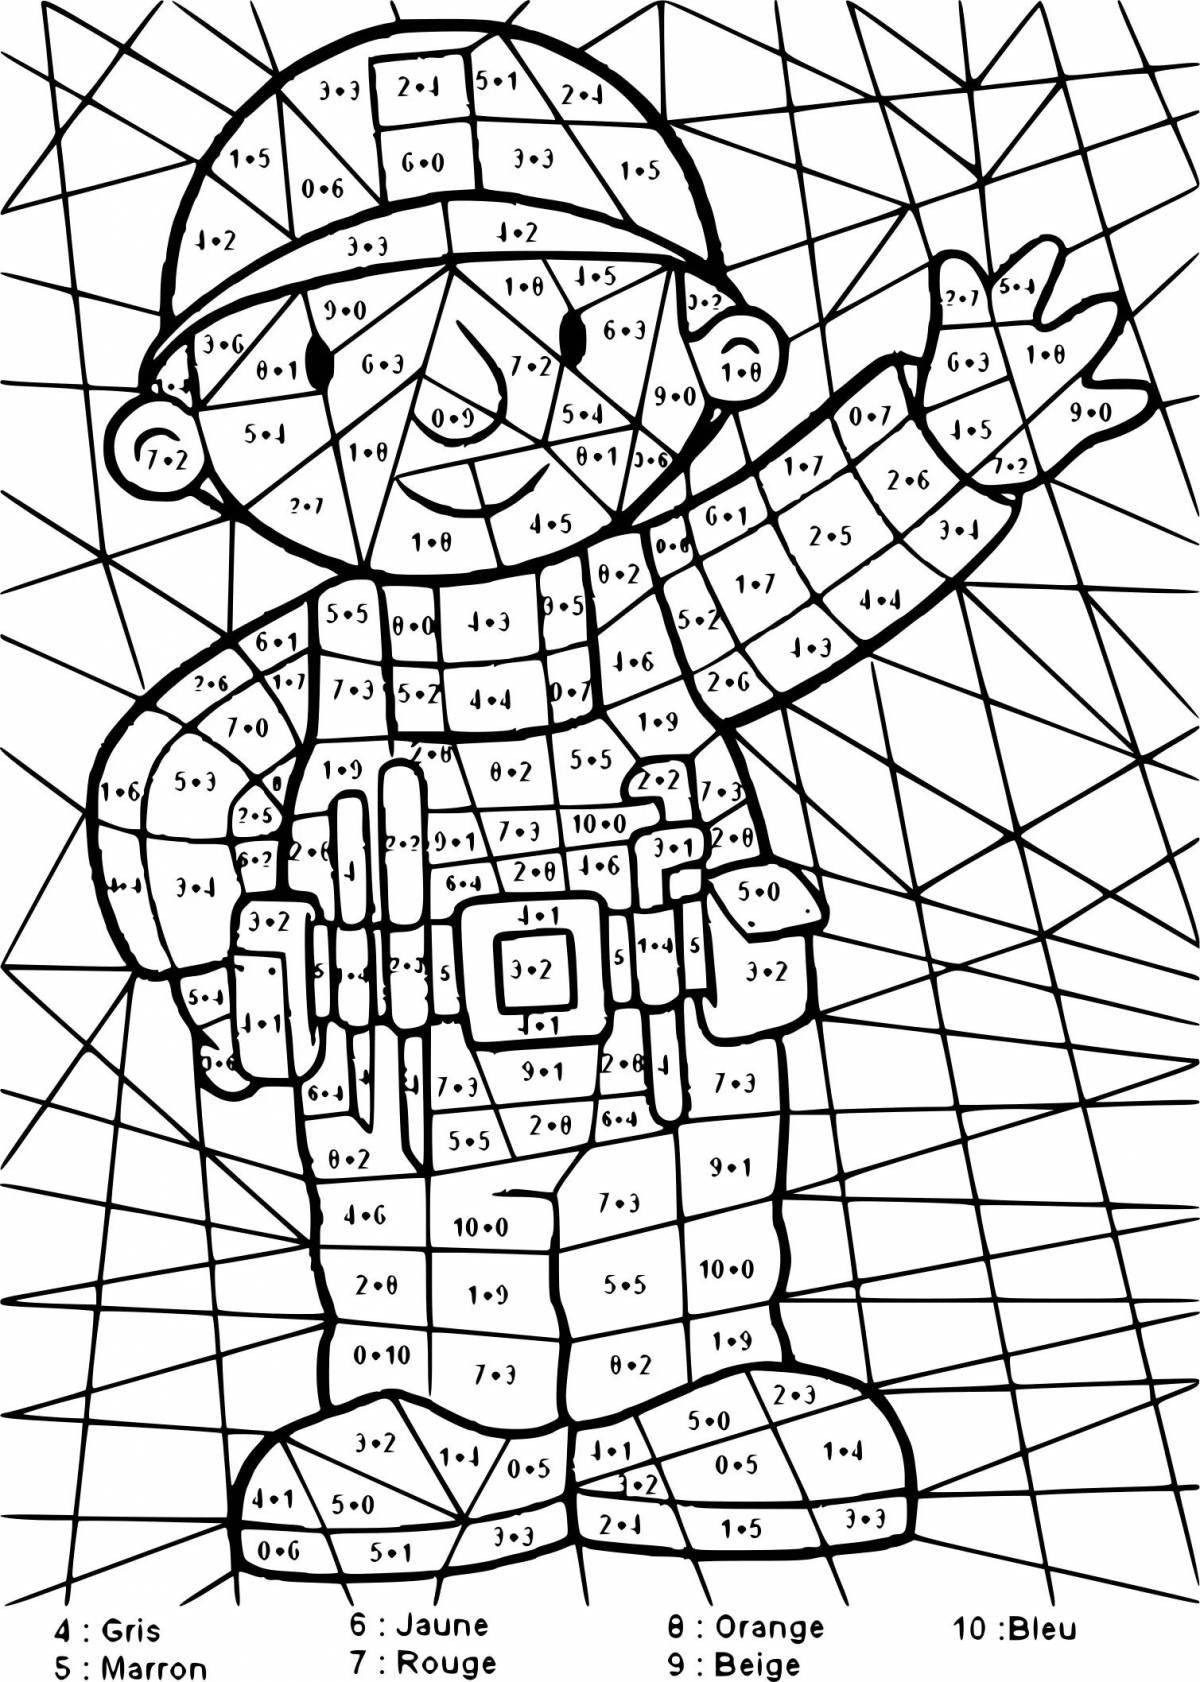 Colorful-fantasy coloring page by numbers 23 февраля